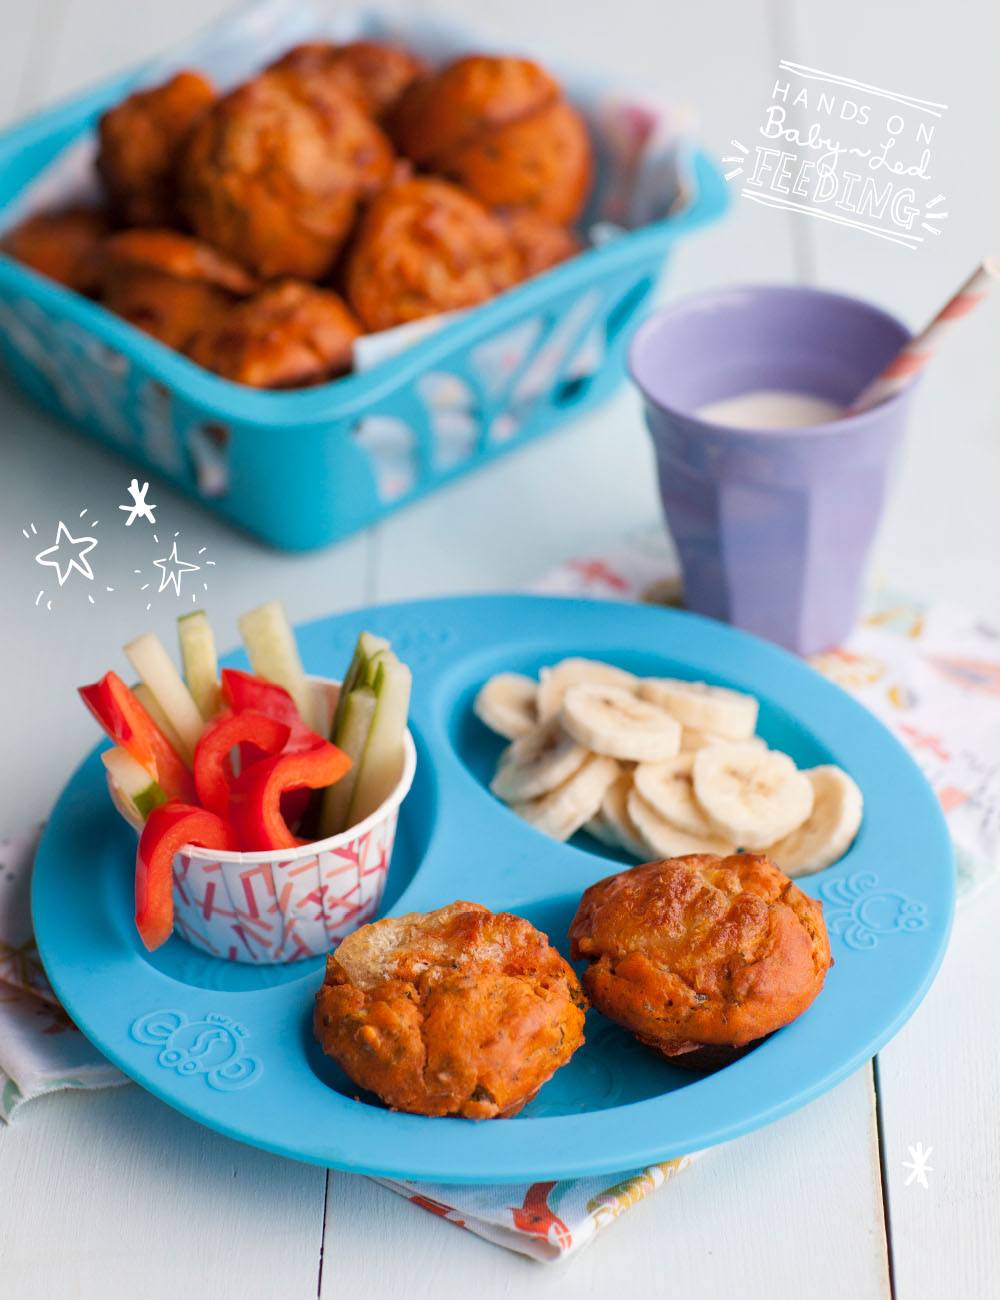 Super Healthy Pizza Muffins Baby Led Feeding a perfect baby lunch, muffins, milk and vegetables. Homemade Baby Food Recipes for baby led weaning by Aileen Cox Blundell. 